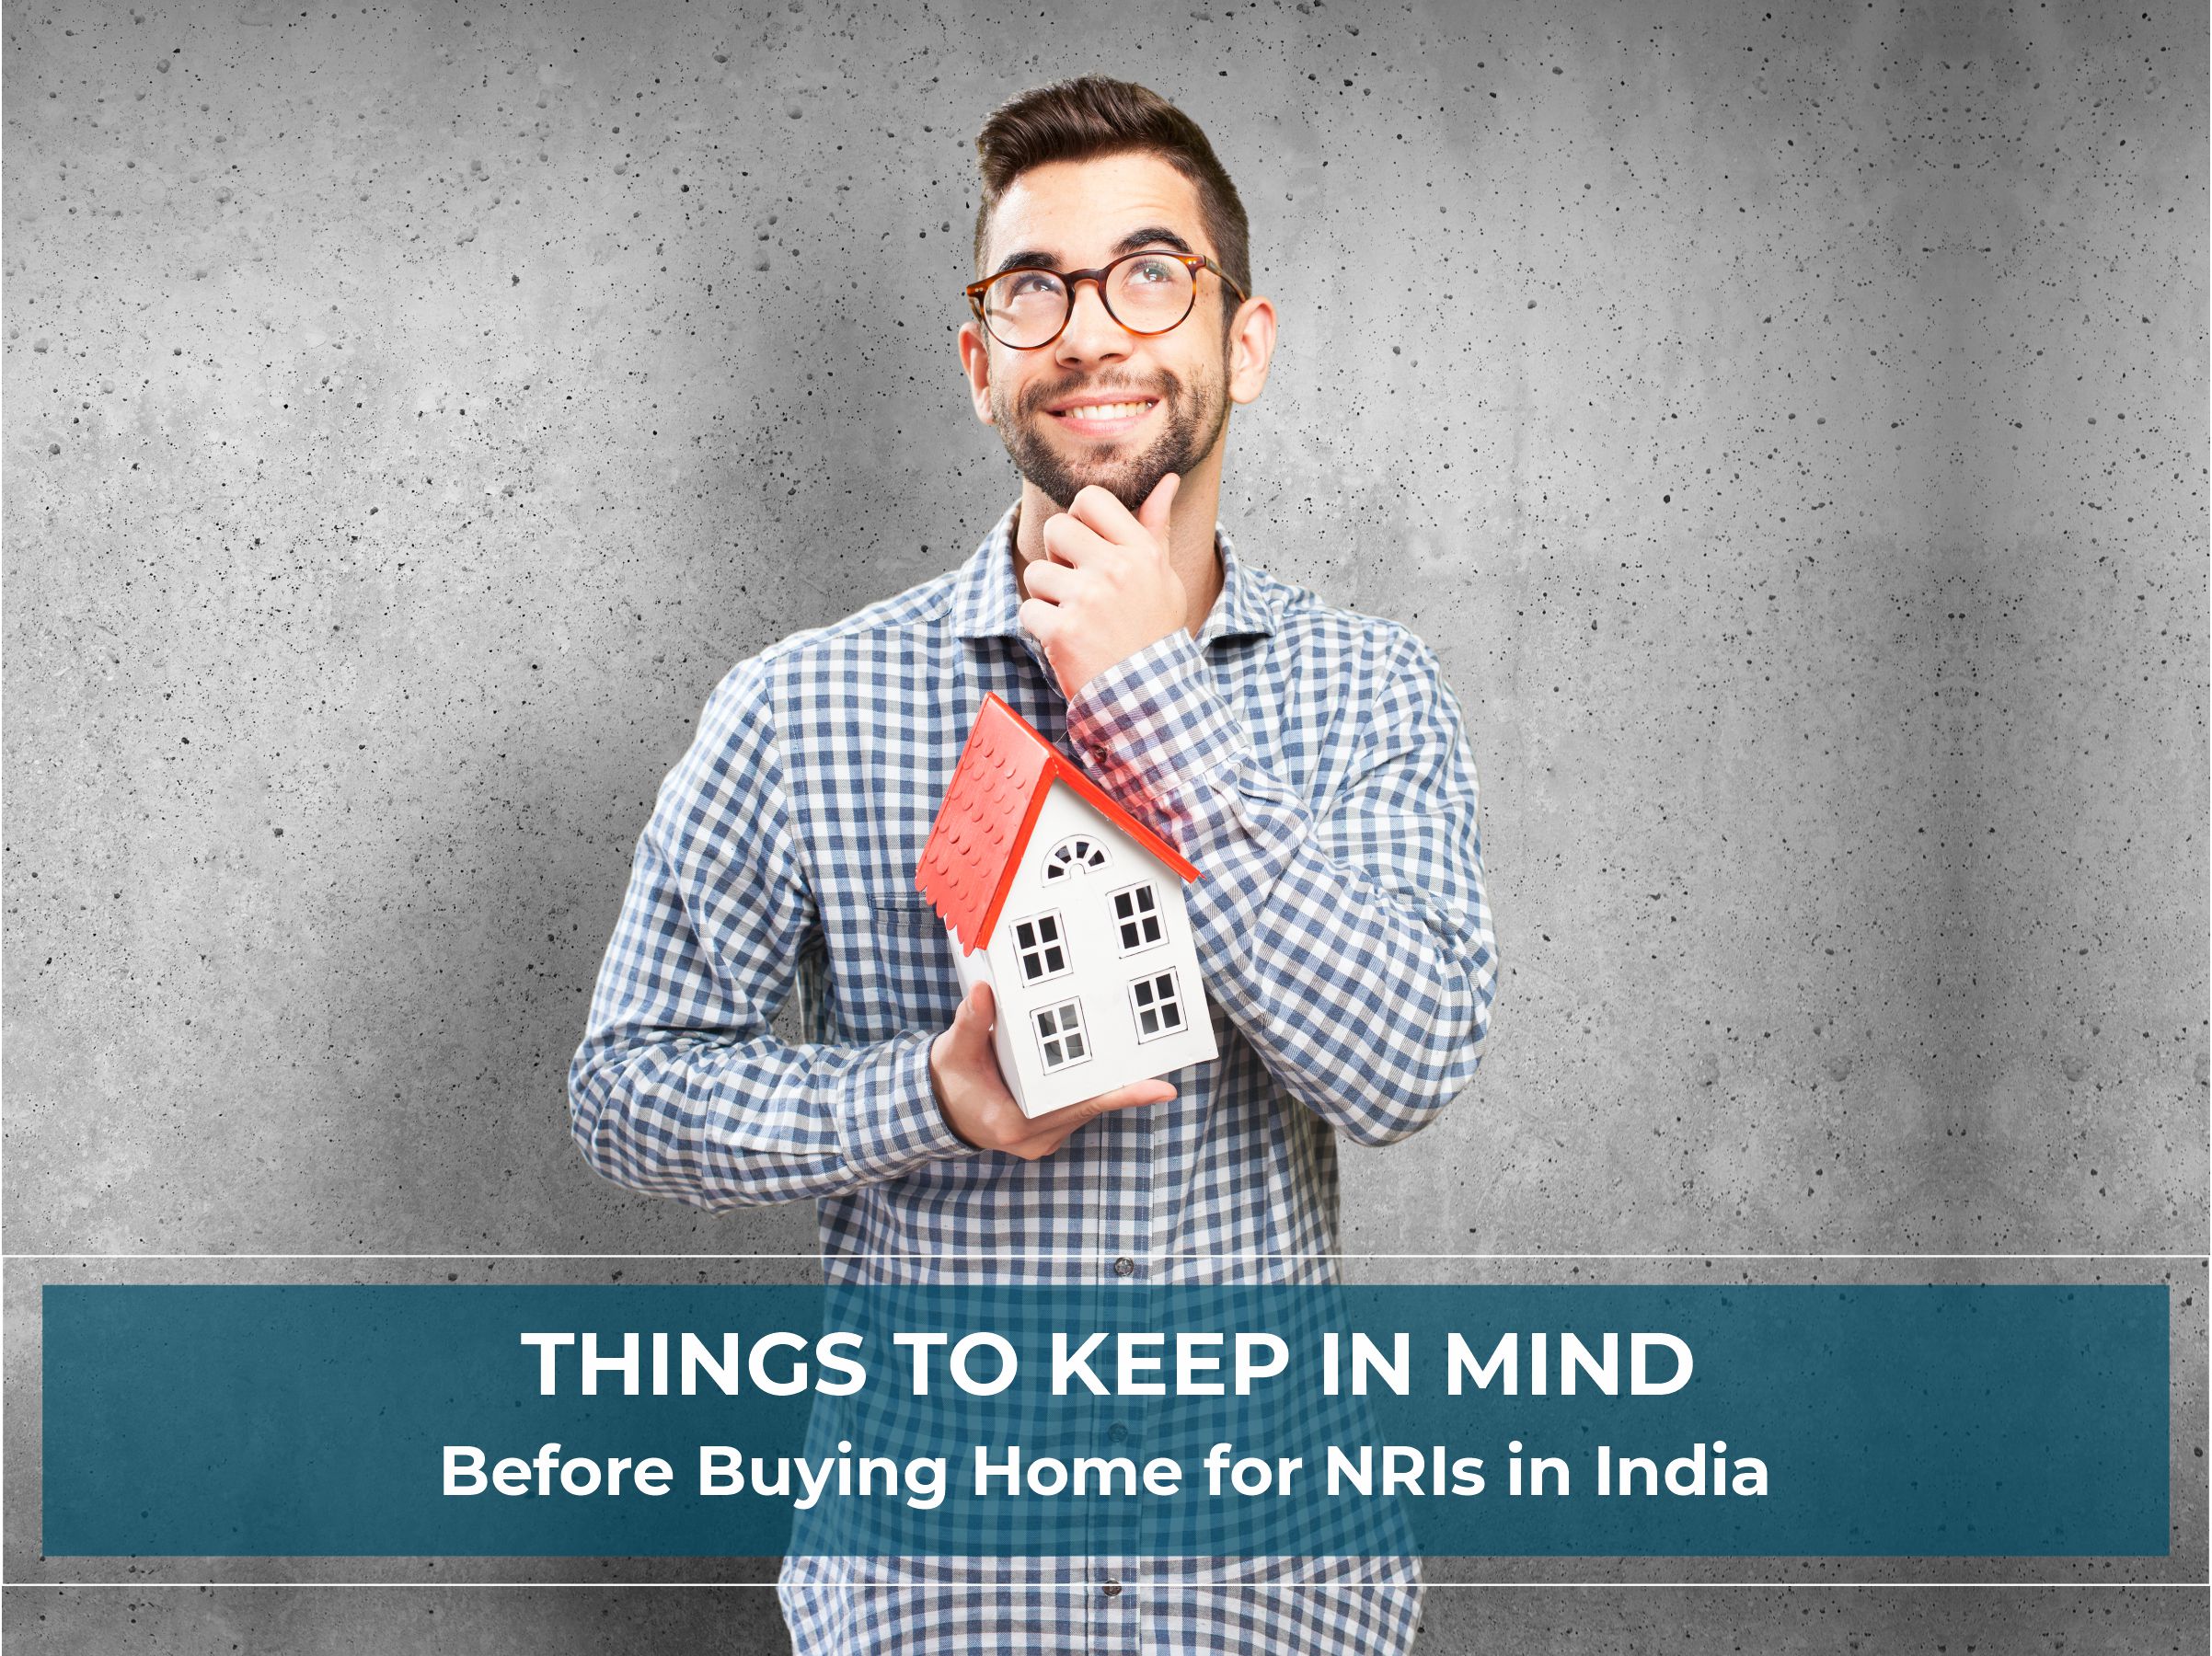 Things to Keep in Mind Before Buying Home for NRIs in India